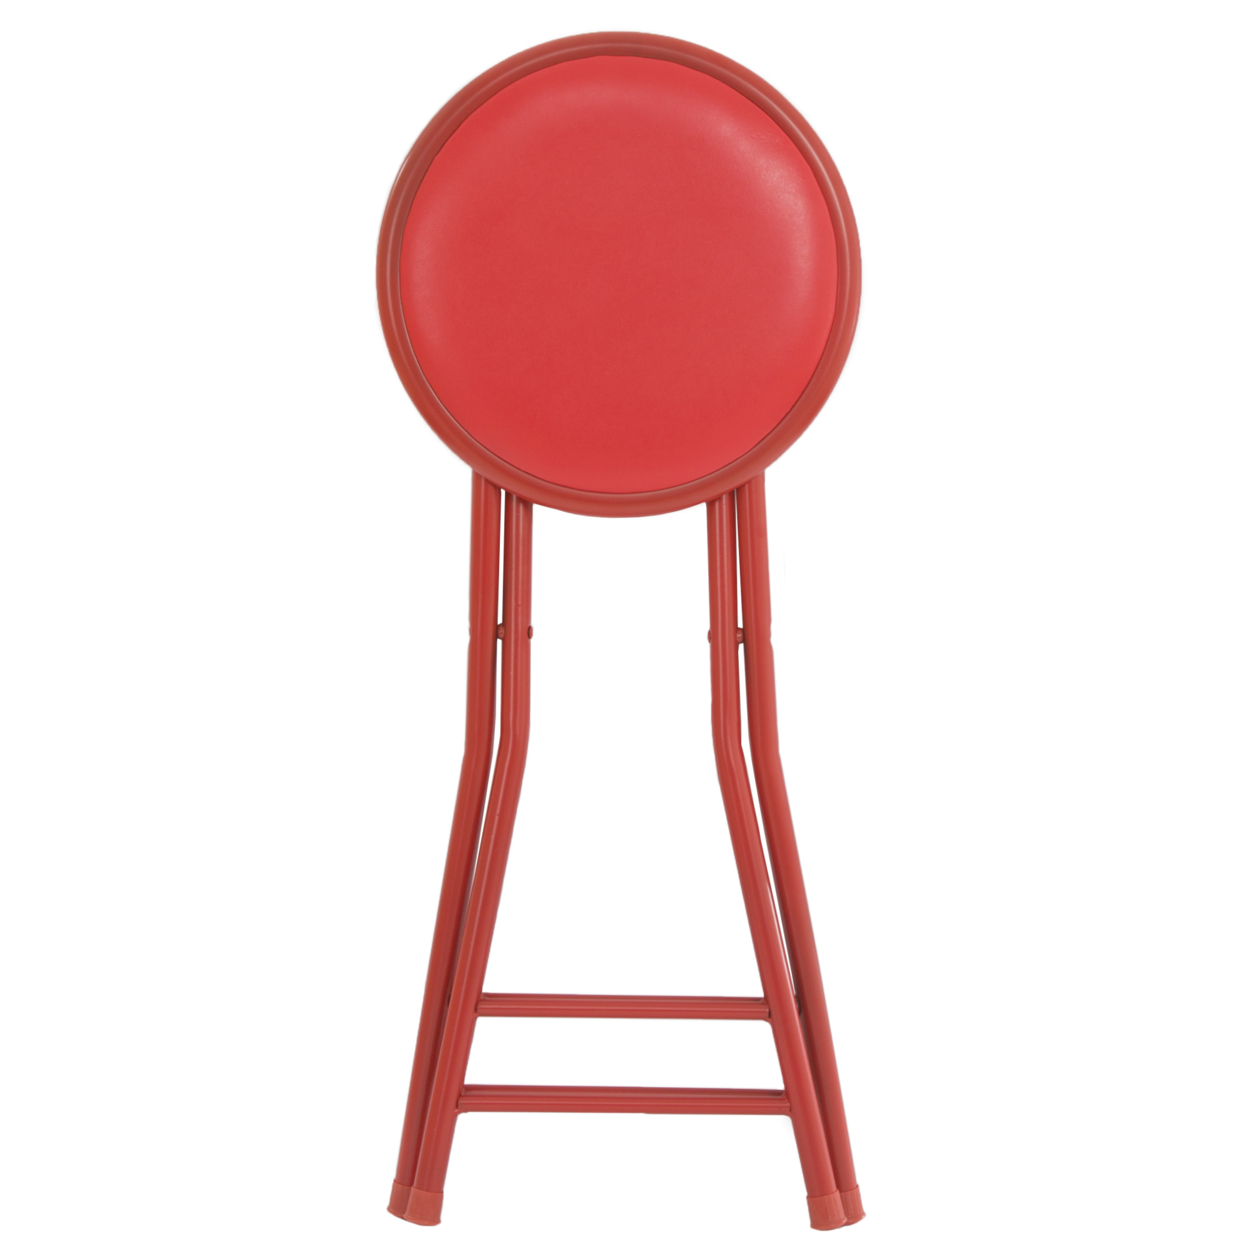 Folding Stool – Heavy Duty 24-Inch Collapsible Padded Round Stool With 300 Pound Limit